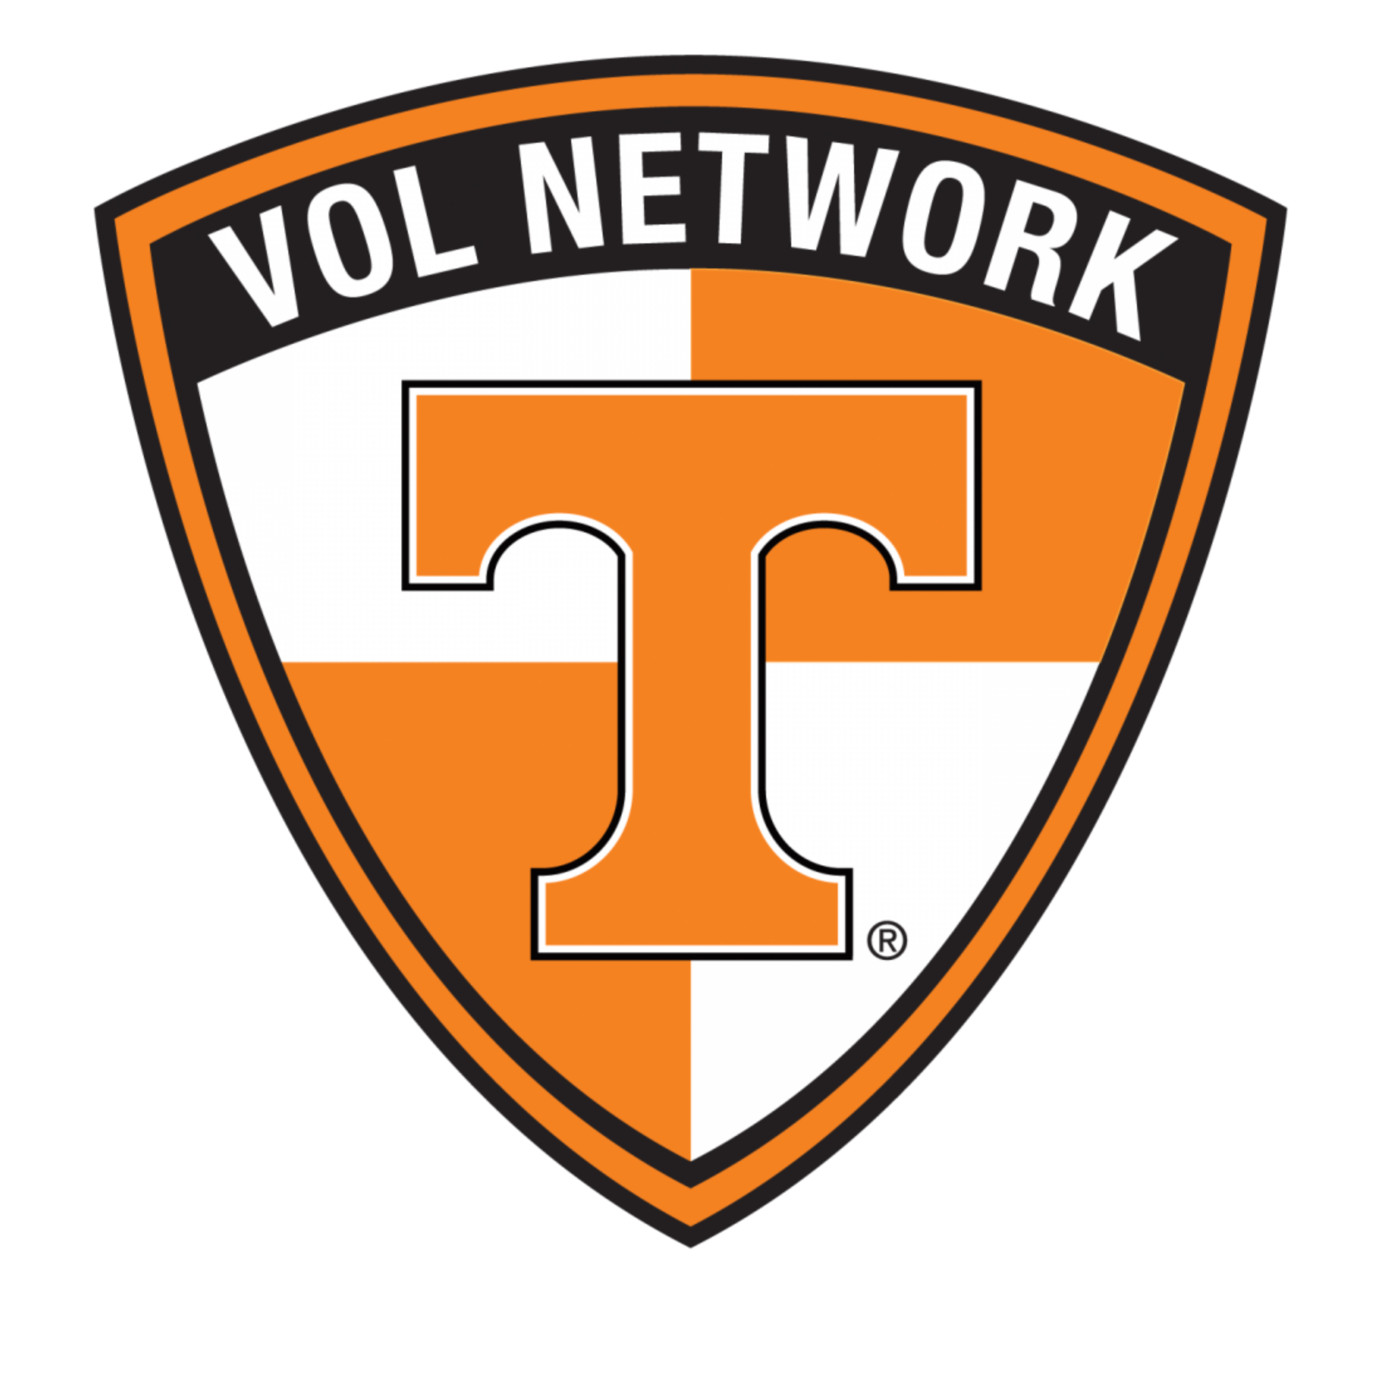 The Vol Network Podcast